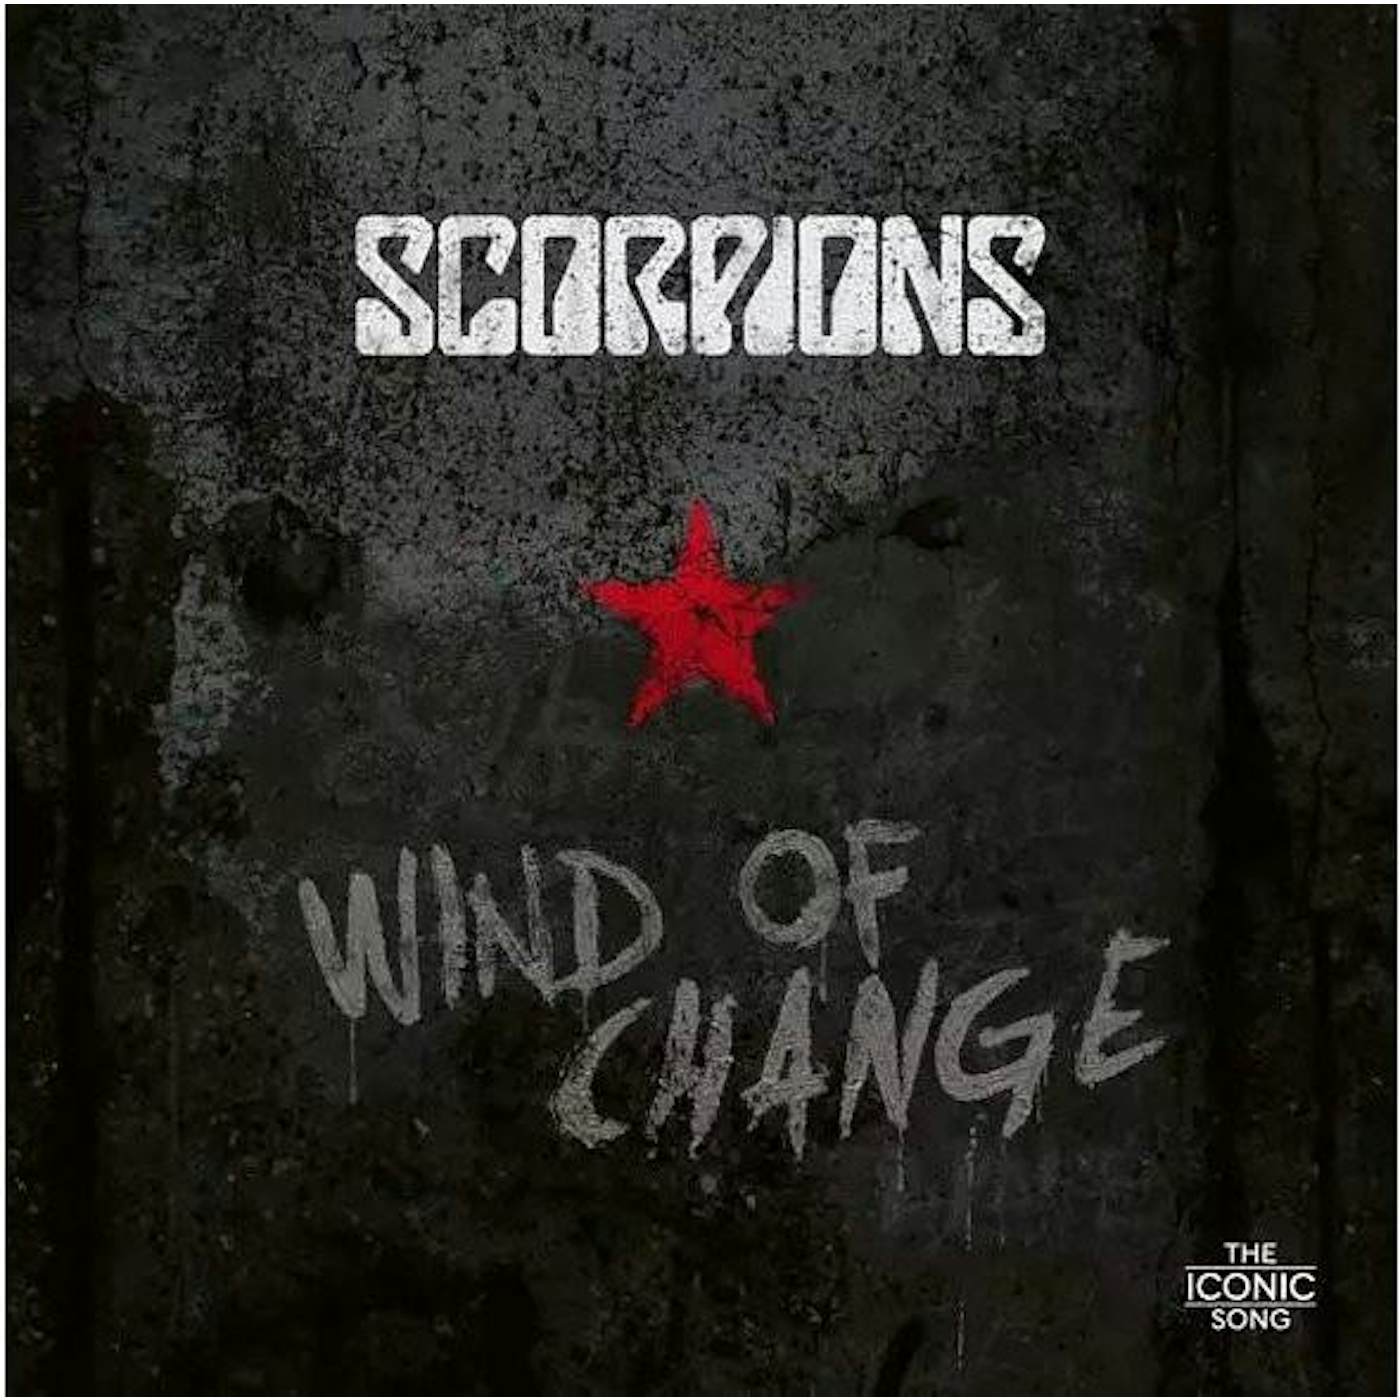 Scorpions WIND OF CHANGE: THE ICONIC SONG (LP/CD) Vinyl Record